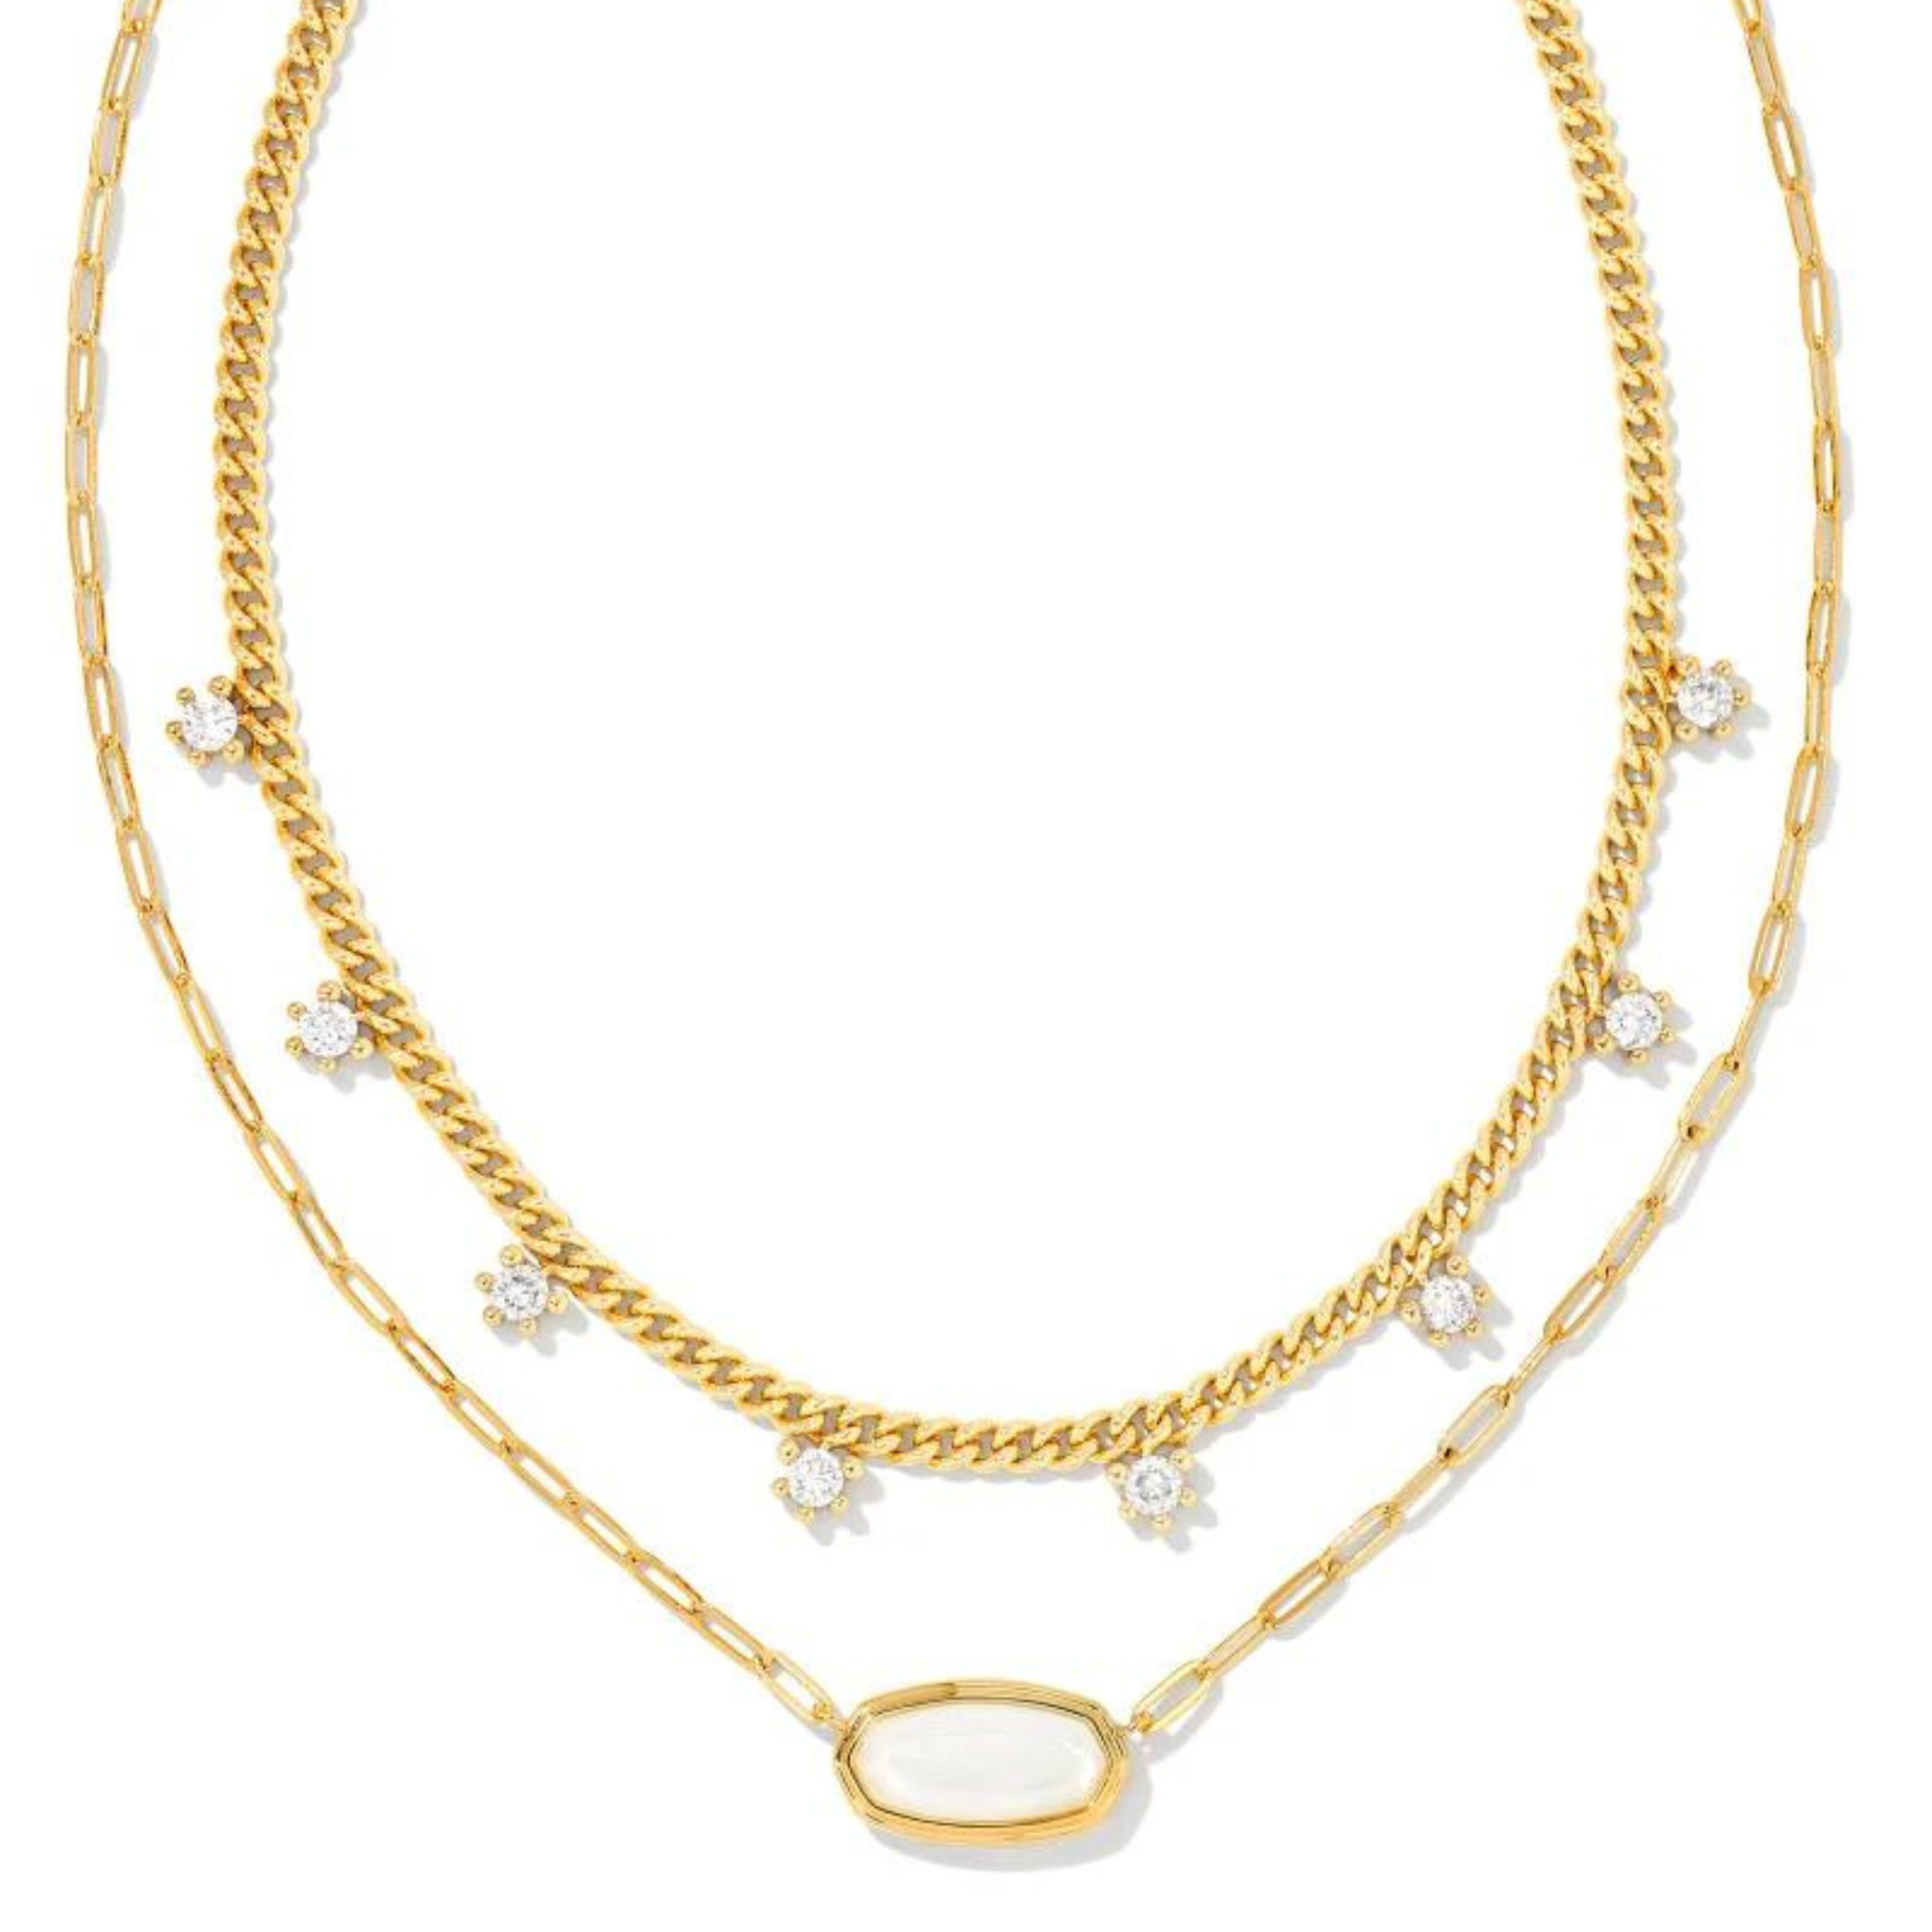 Gold multi strand necklace with white crystals and a gold iridescent opalite illusion stone, pictured on a white background. 